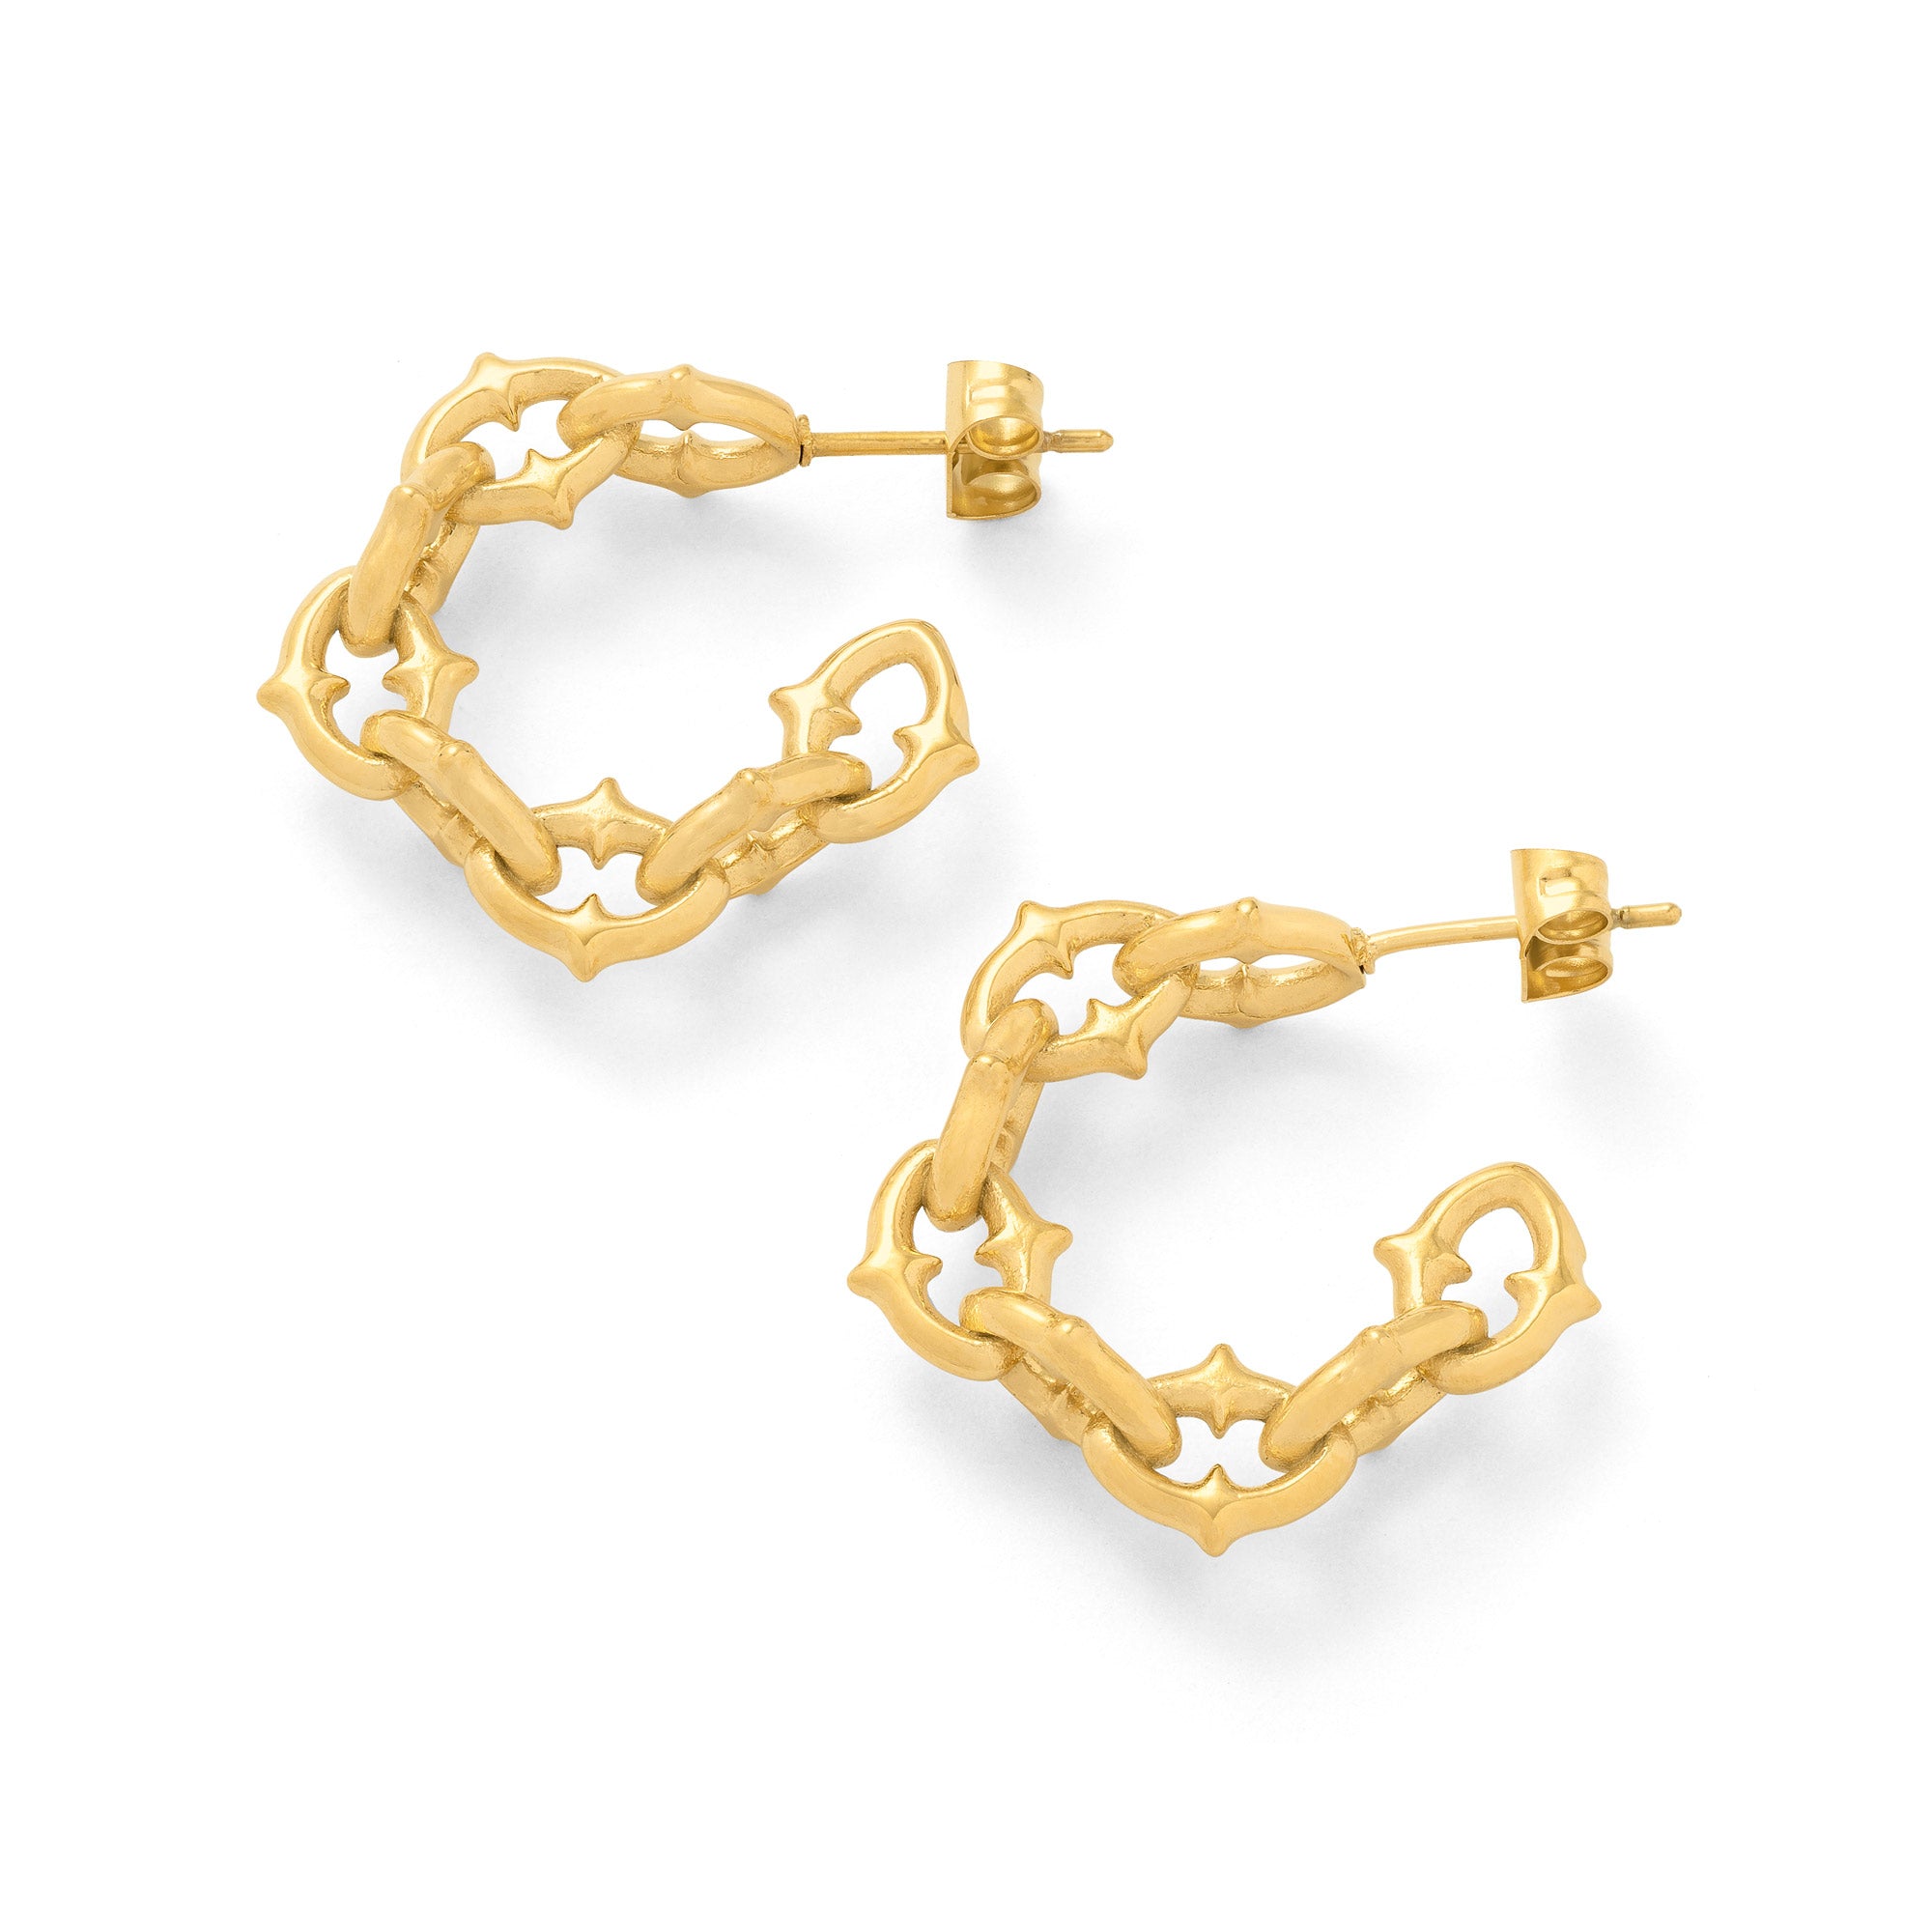 Gold spiked chain punk earrings